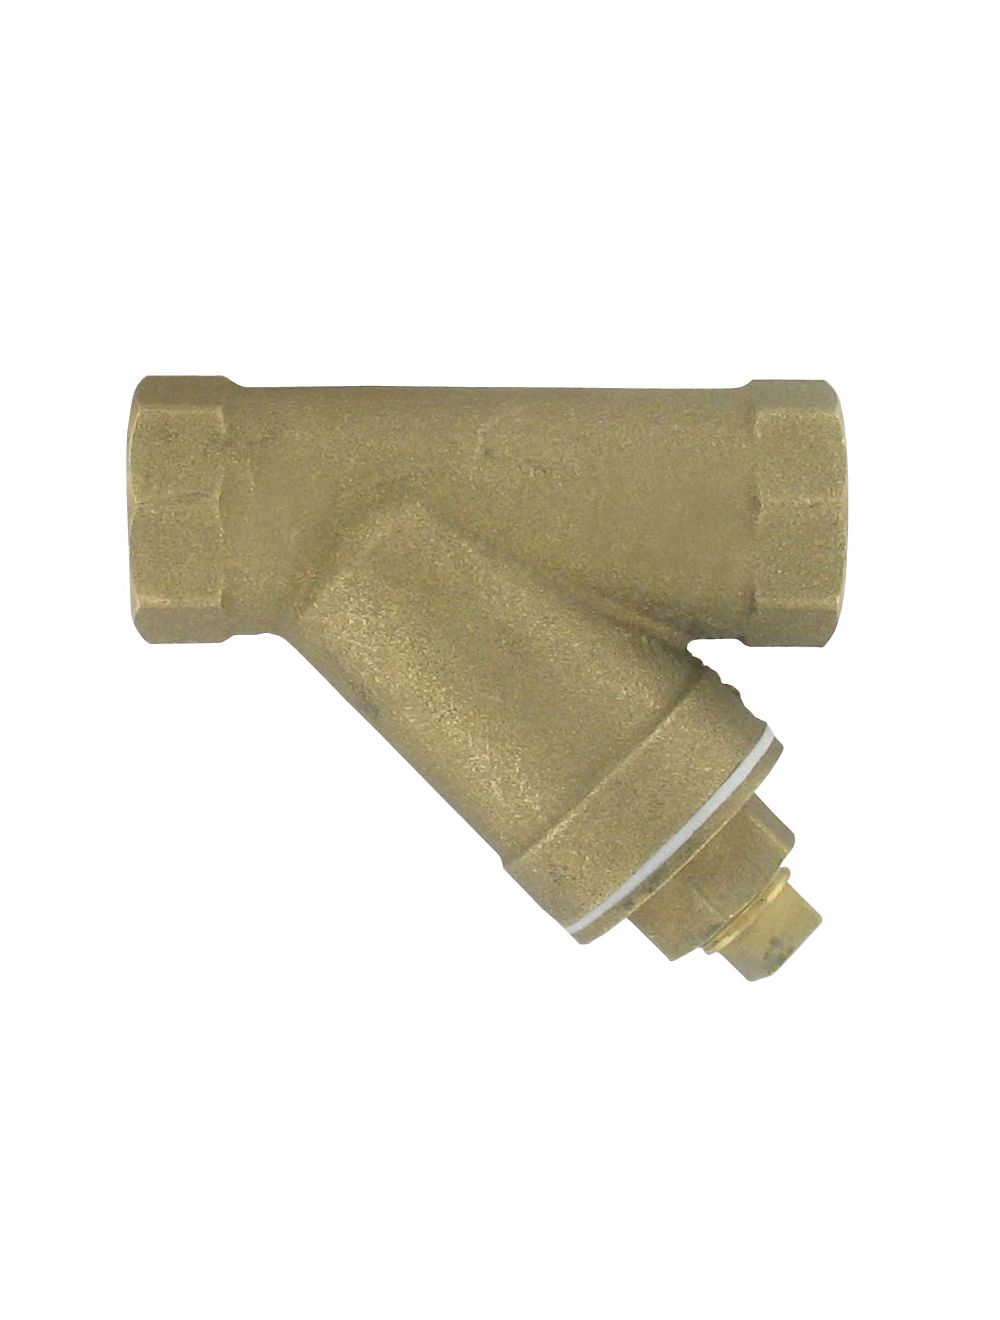 Series BYS  Brass Y-Strainer is a cost effective option for use